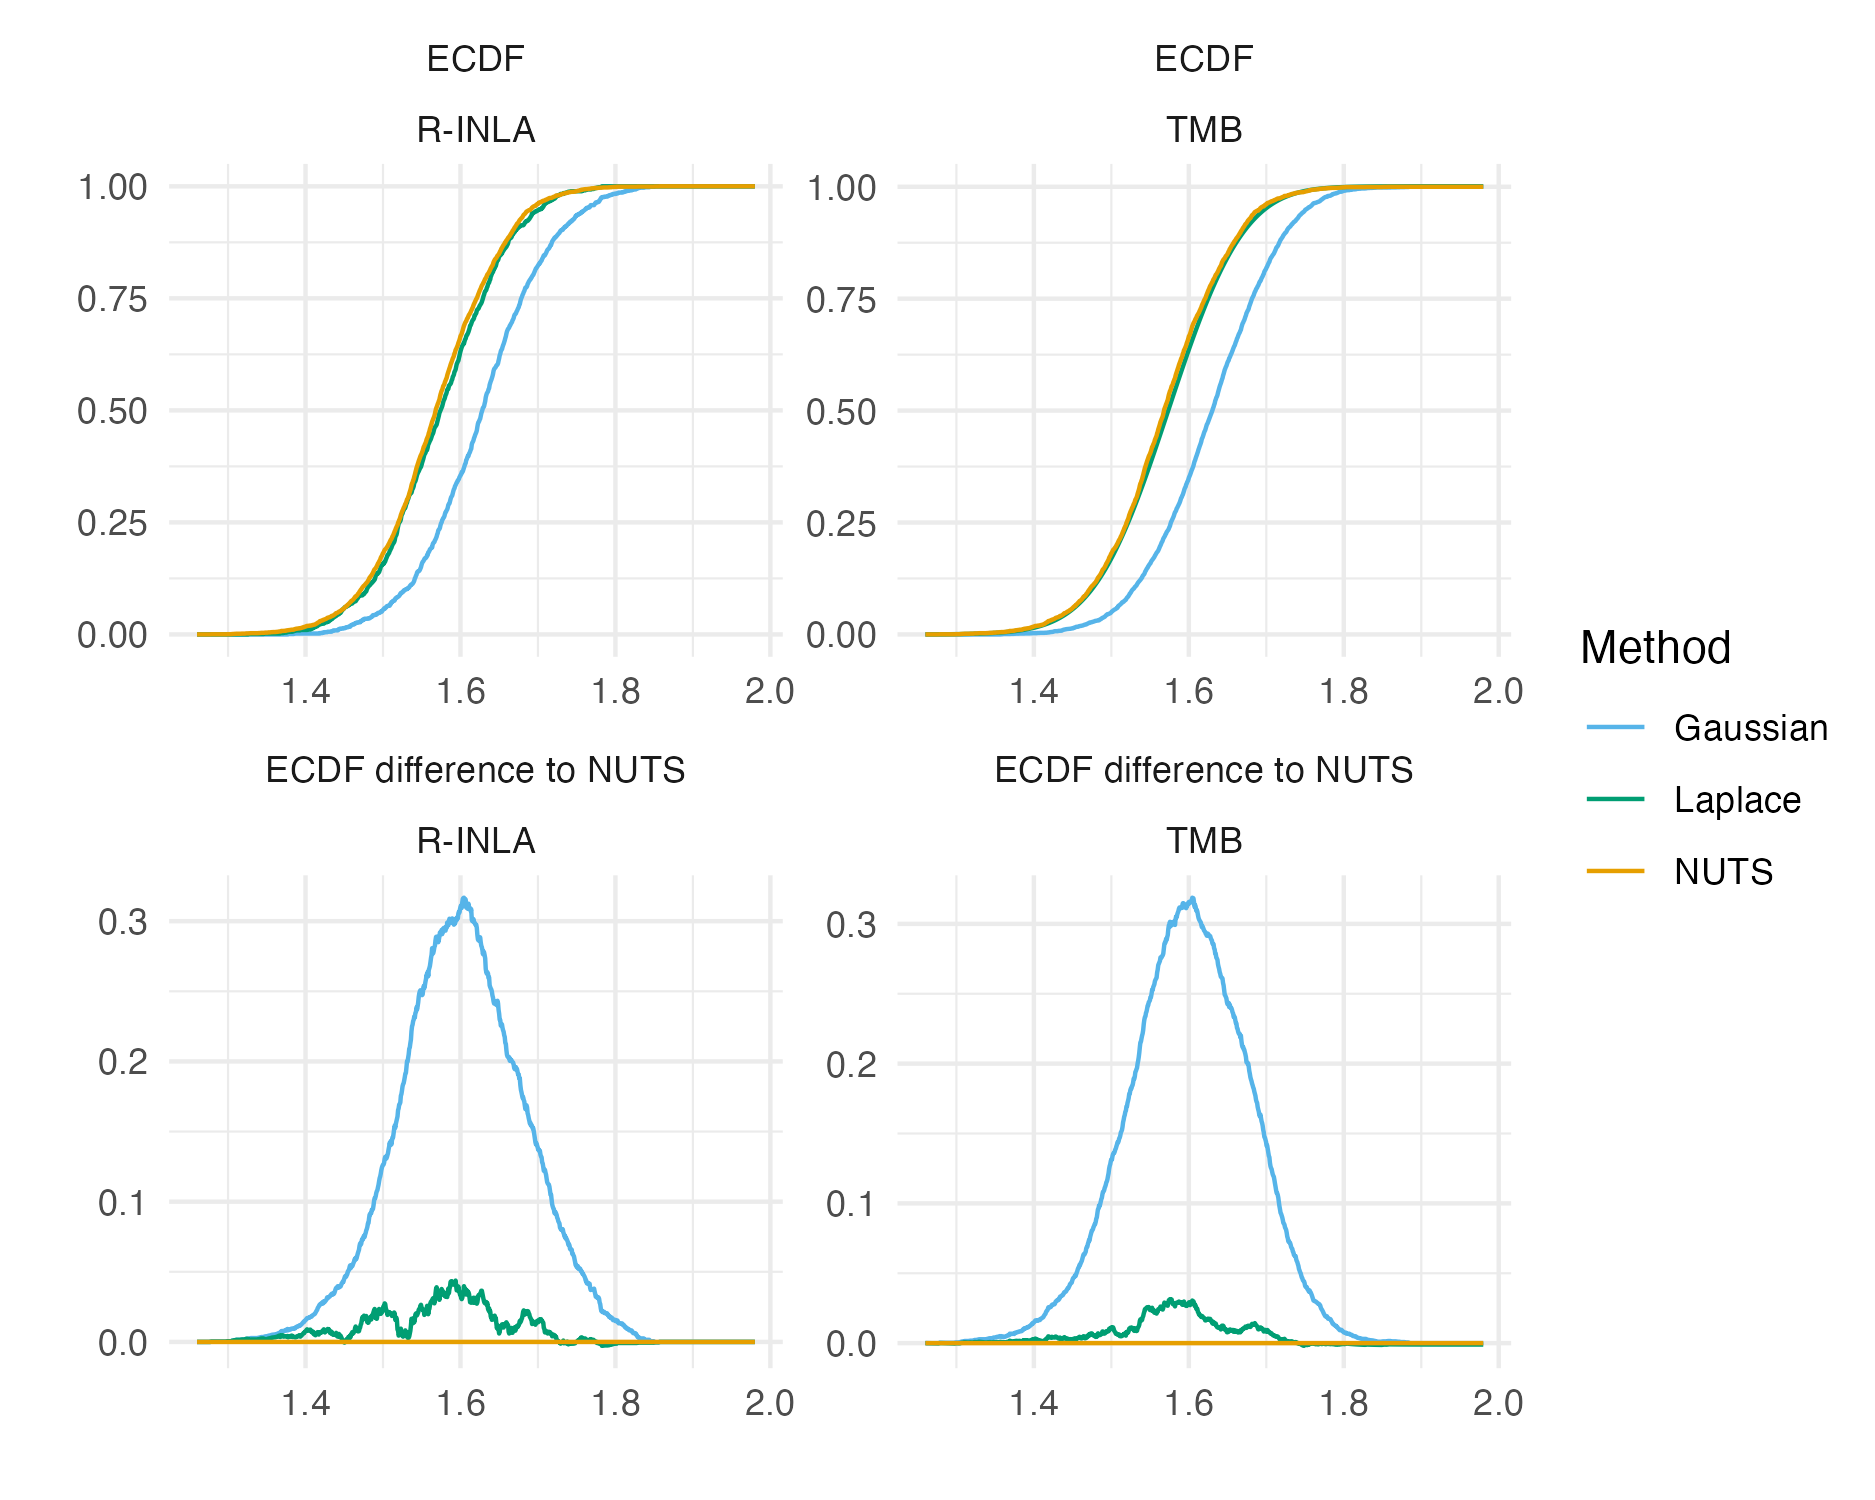 The ECDF and ECDF difference for the \(\beta_0\) latent field parameter. For this parameter, the Gaussian marginal results are inaccurate, and are corrected almost entirely by the Laplace marginal. An ECDF difference of zero corresponds to obtaining exactly the same results as NUTS, taken to be the gold-standard. Crucially, results obtained using R-INLA and TMB implementations are similar.